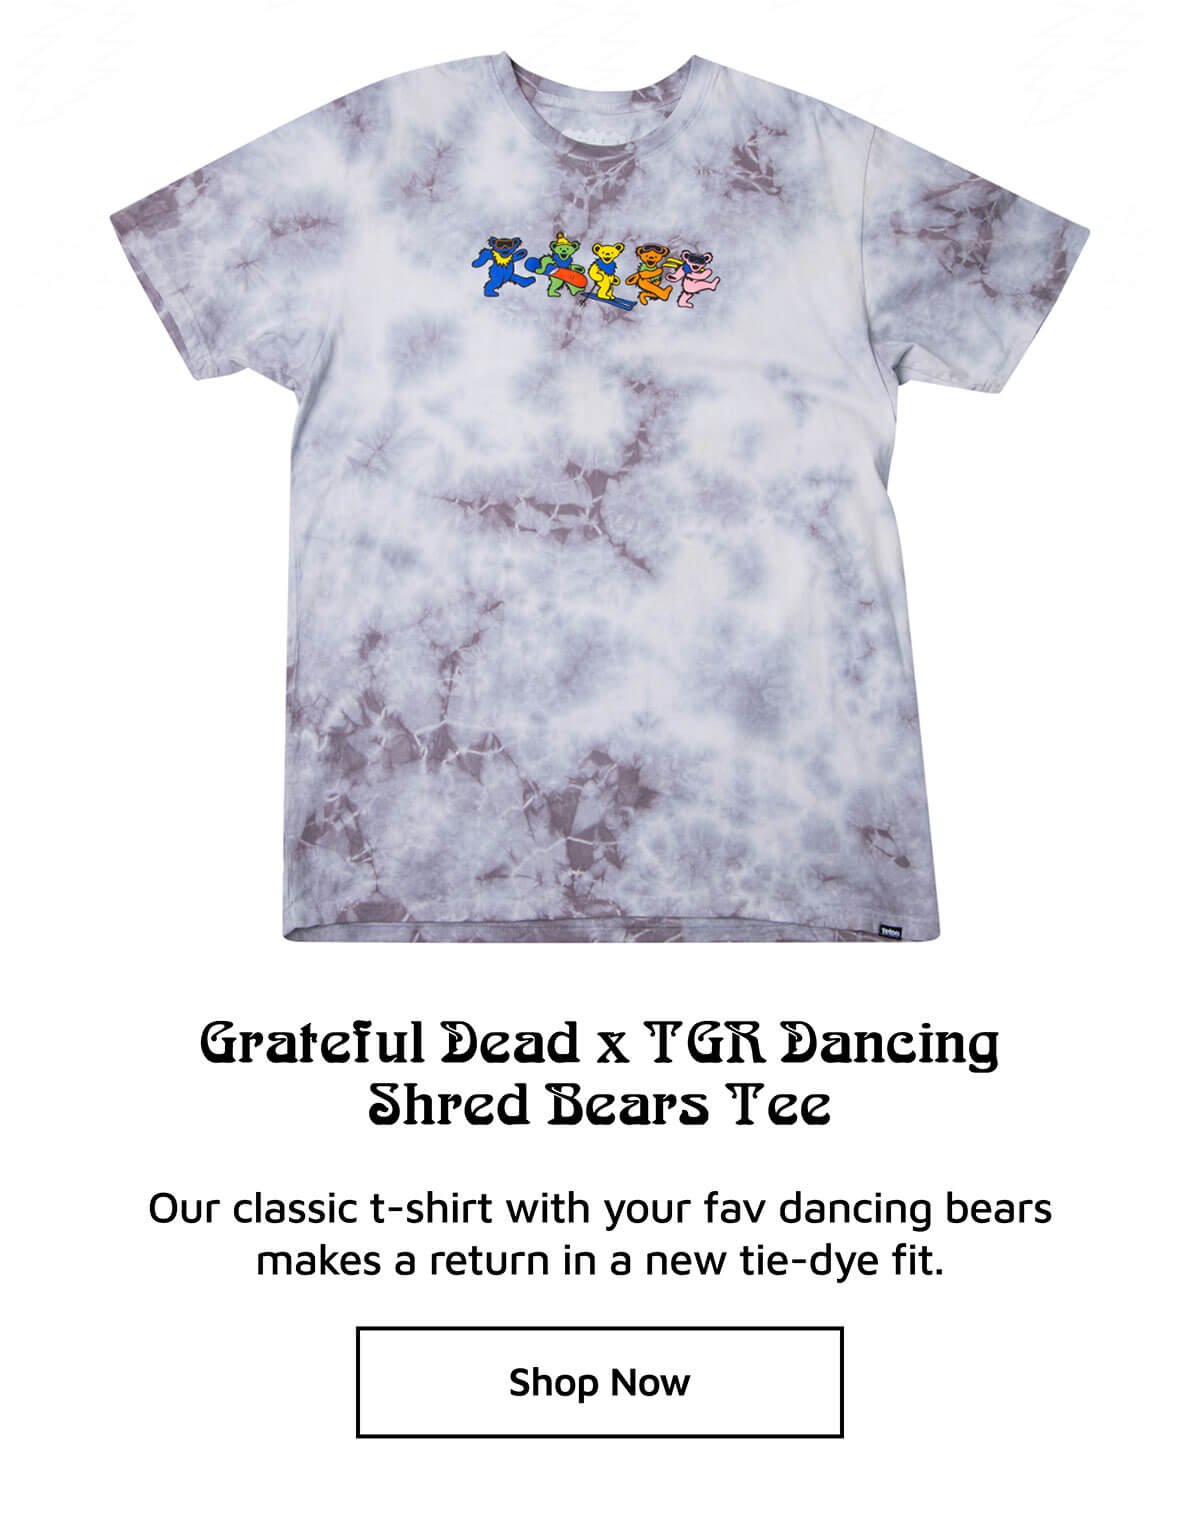 Grateful Dead x TGR Dancing Shred Bears Tee. Our classic t-shirt with your fav dancing bears makes a return in a new tie-dye fit.